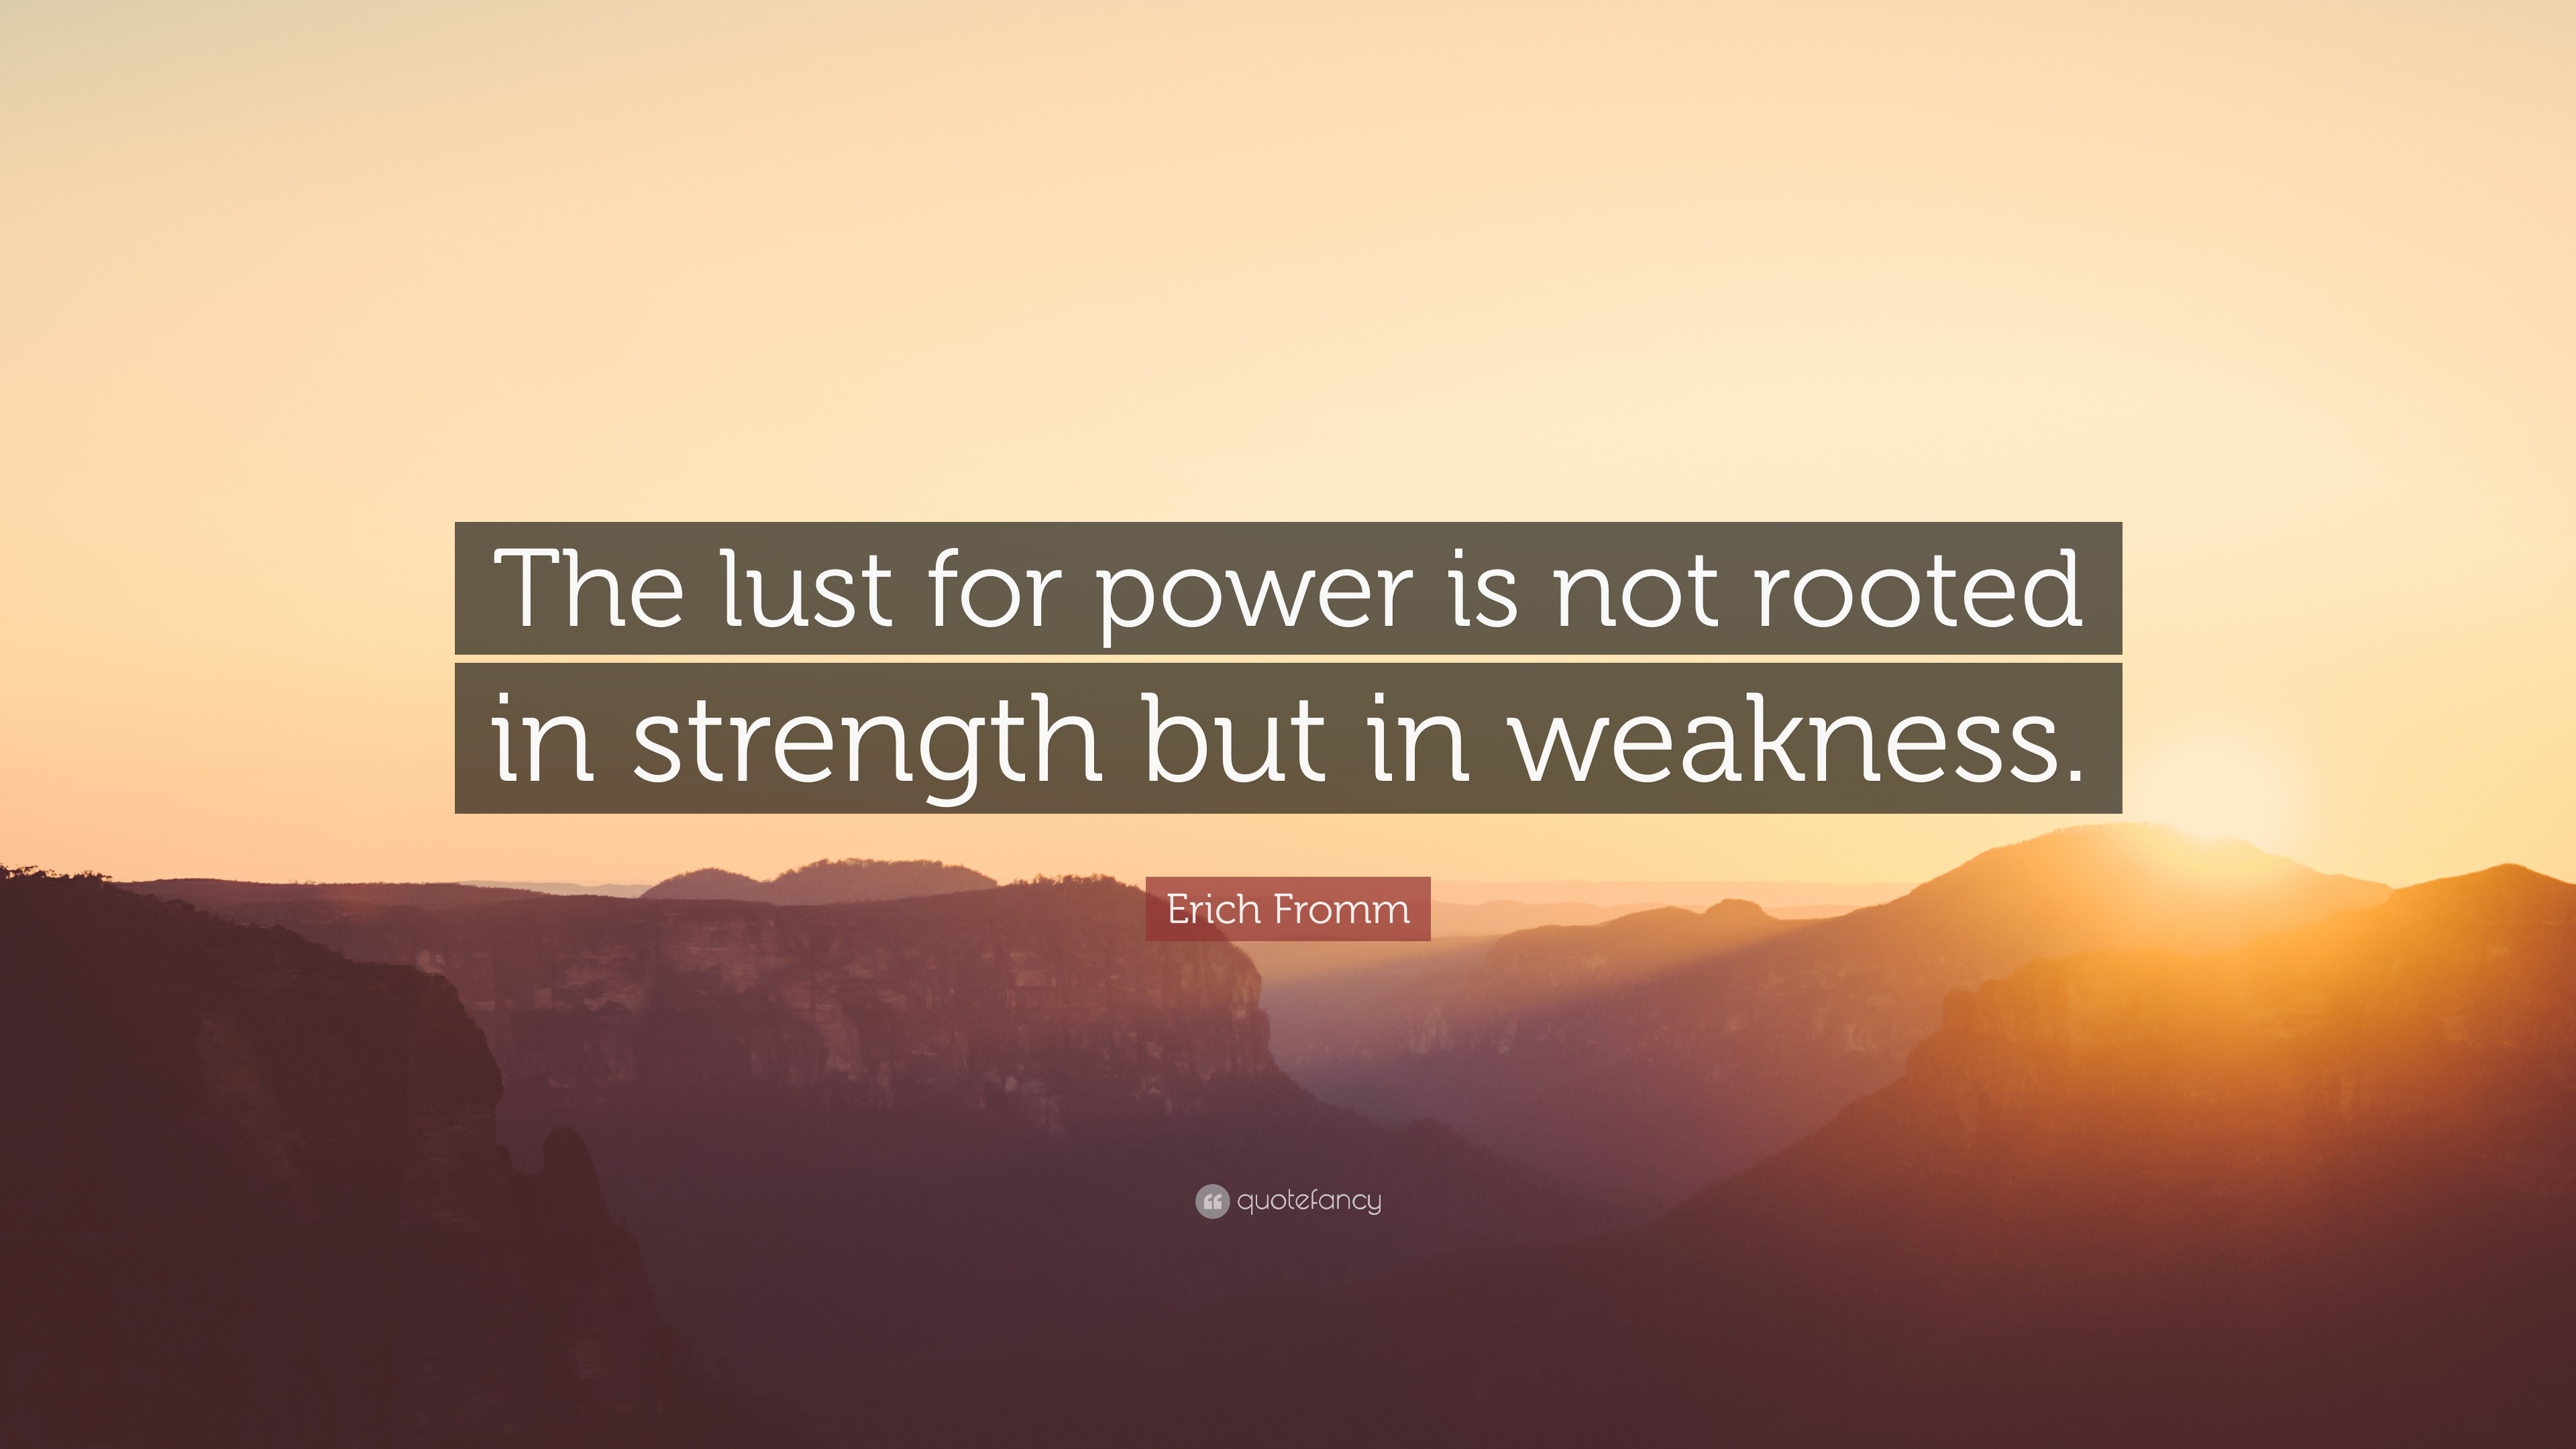 Erich Fromm Quote: “The lust for power is not rooted in strength but in ...